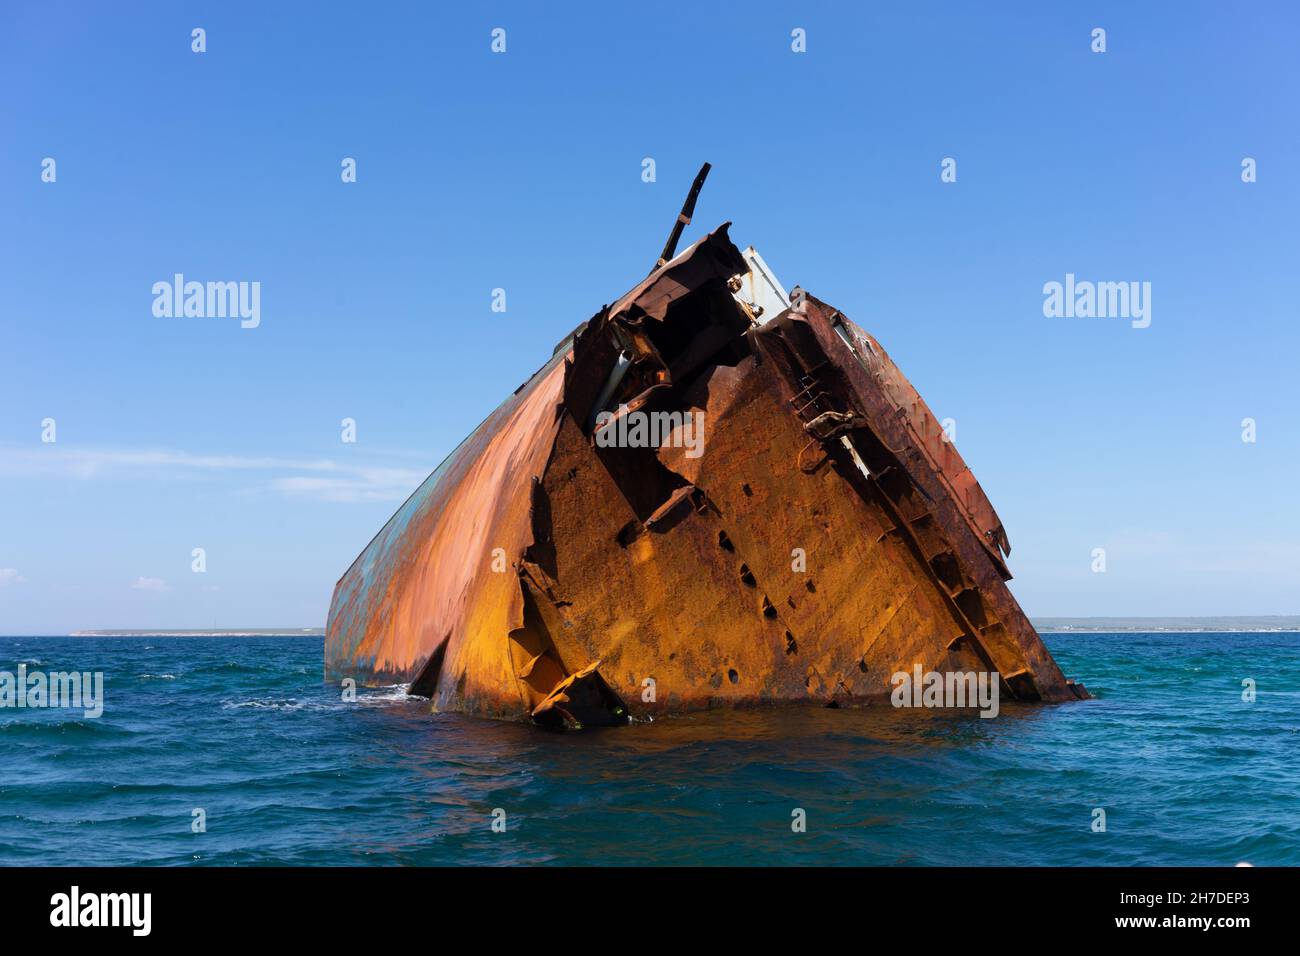 Part of the wreck sticking out of the water off the coast of Tarkhankut, Crimea Stock Photo